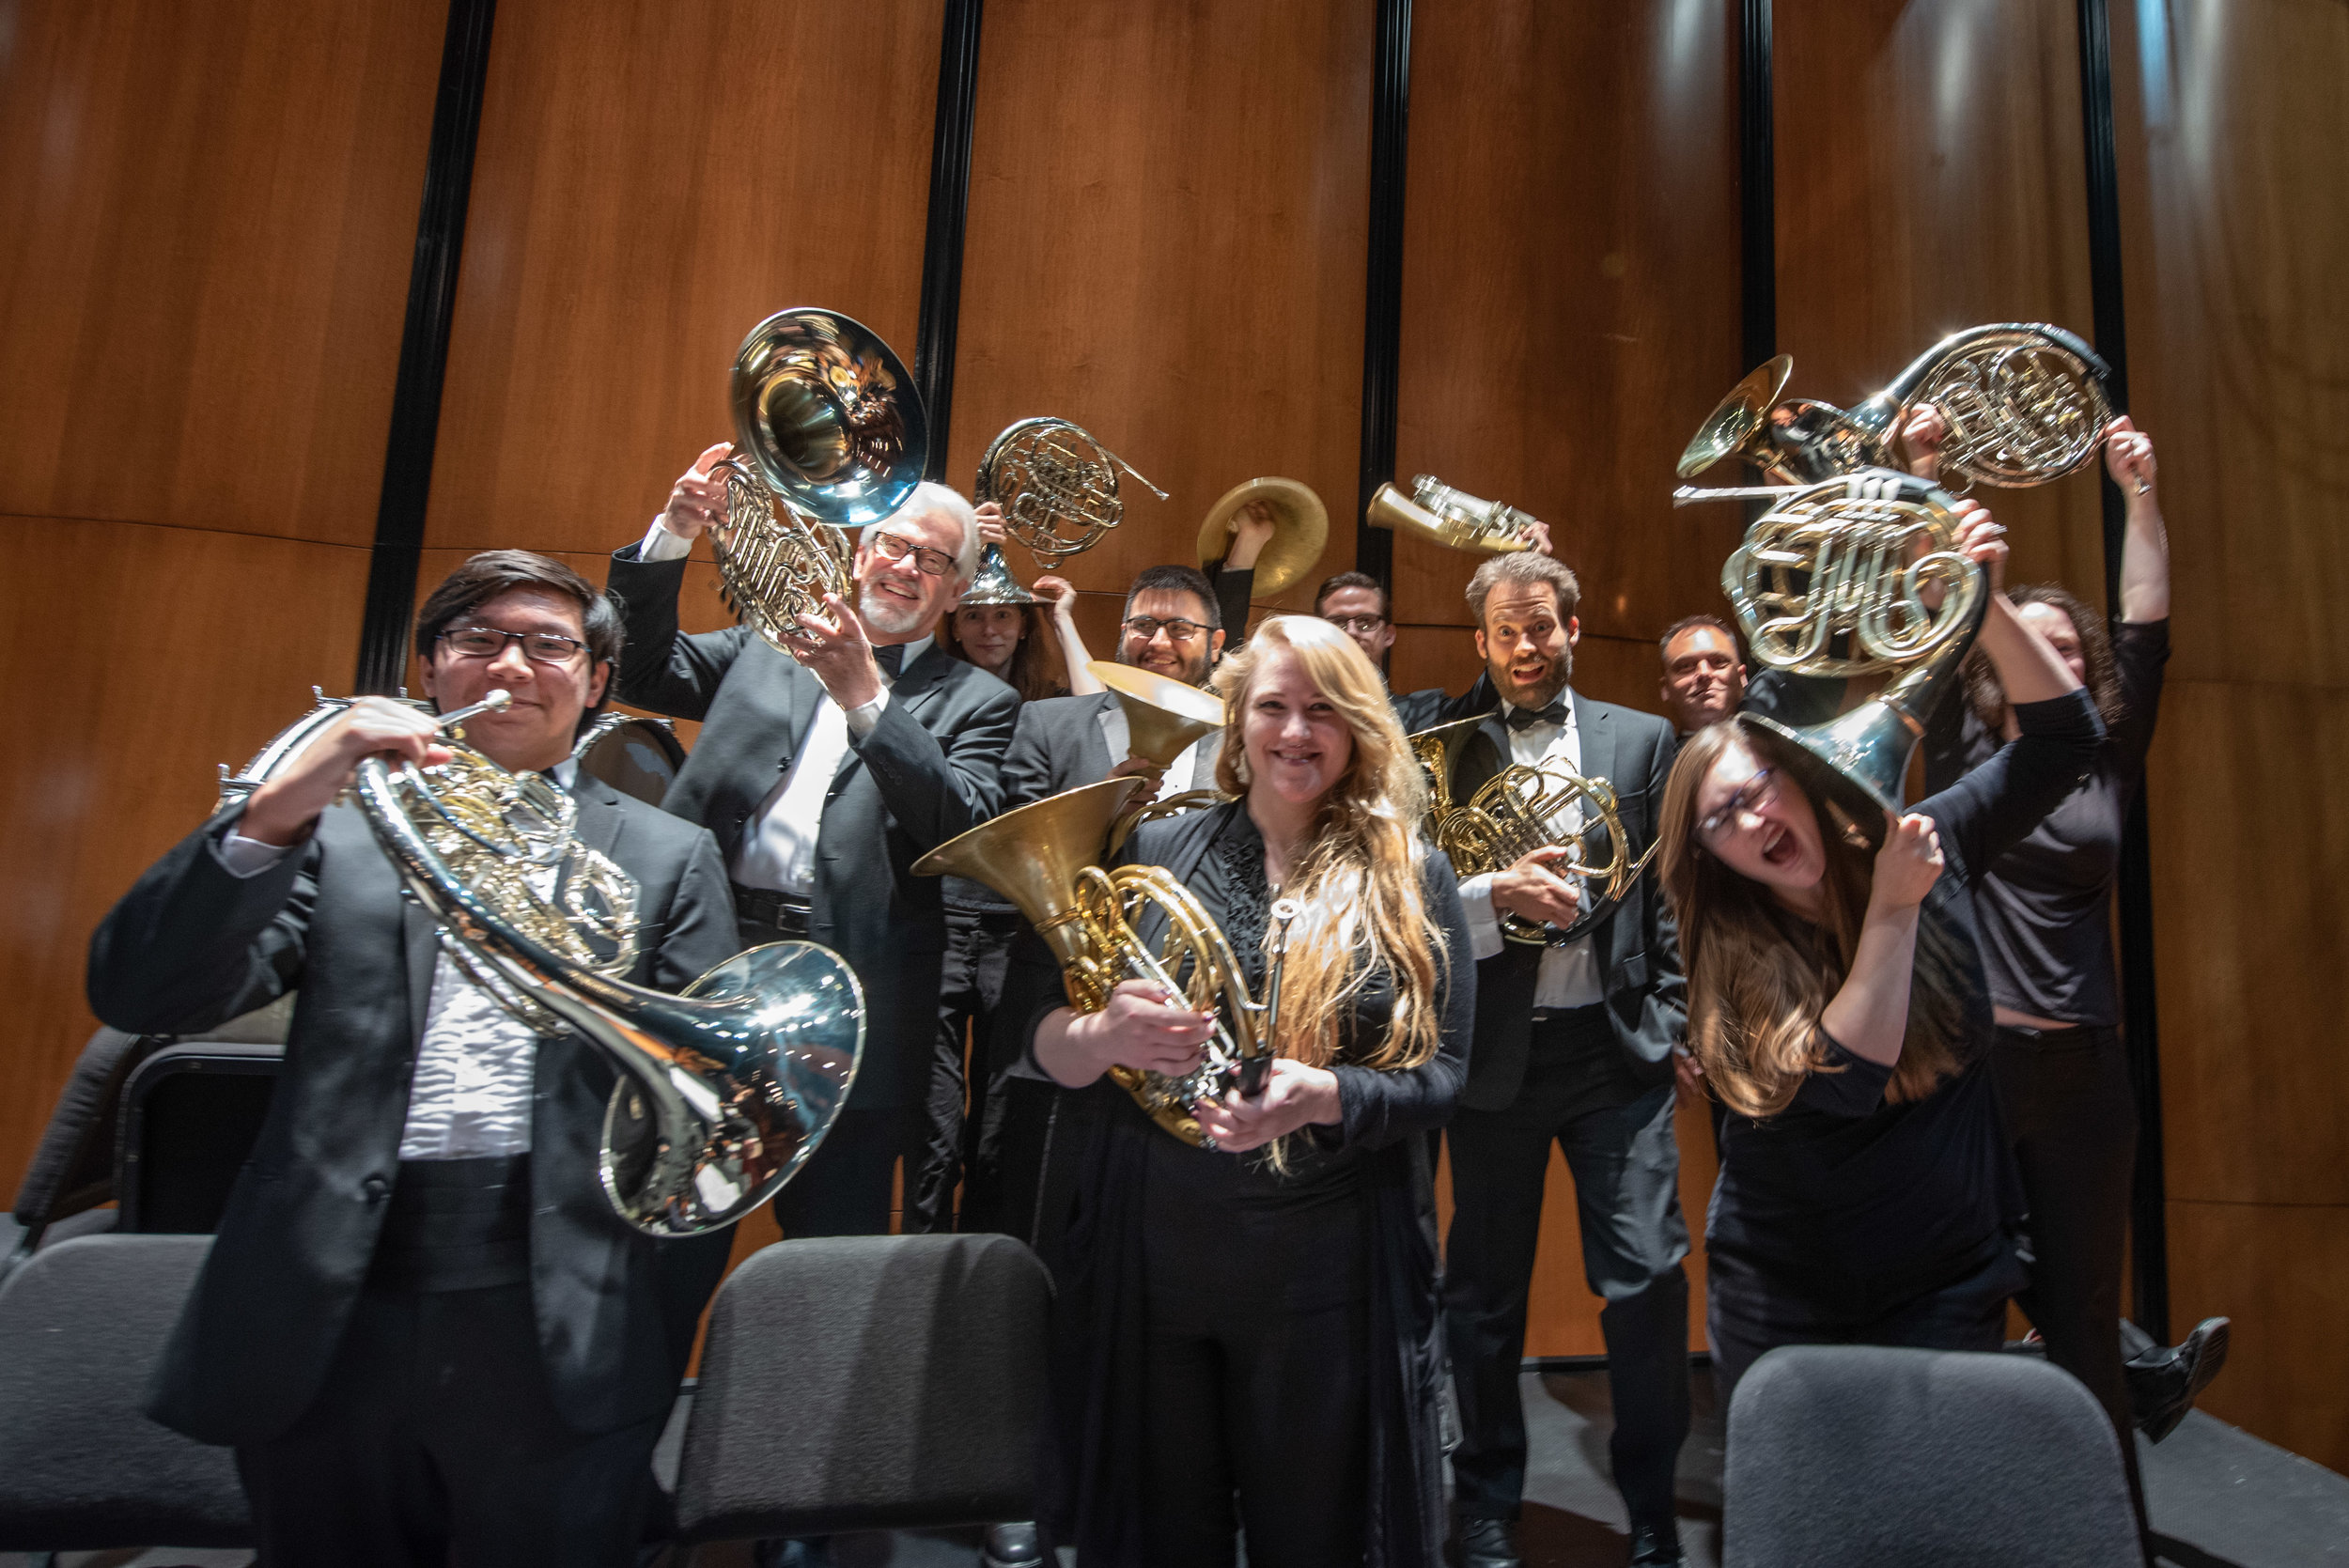  TMCO french horns having some fun after performing Mahler Symphony No. 3. 